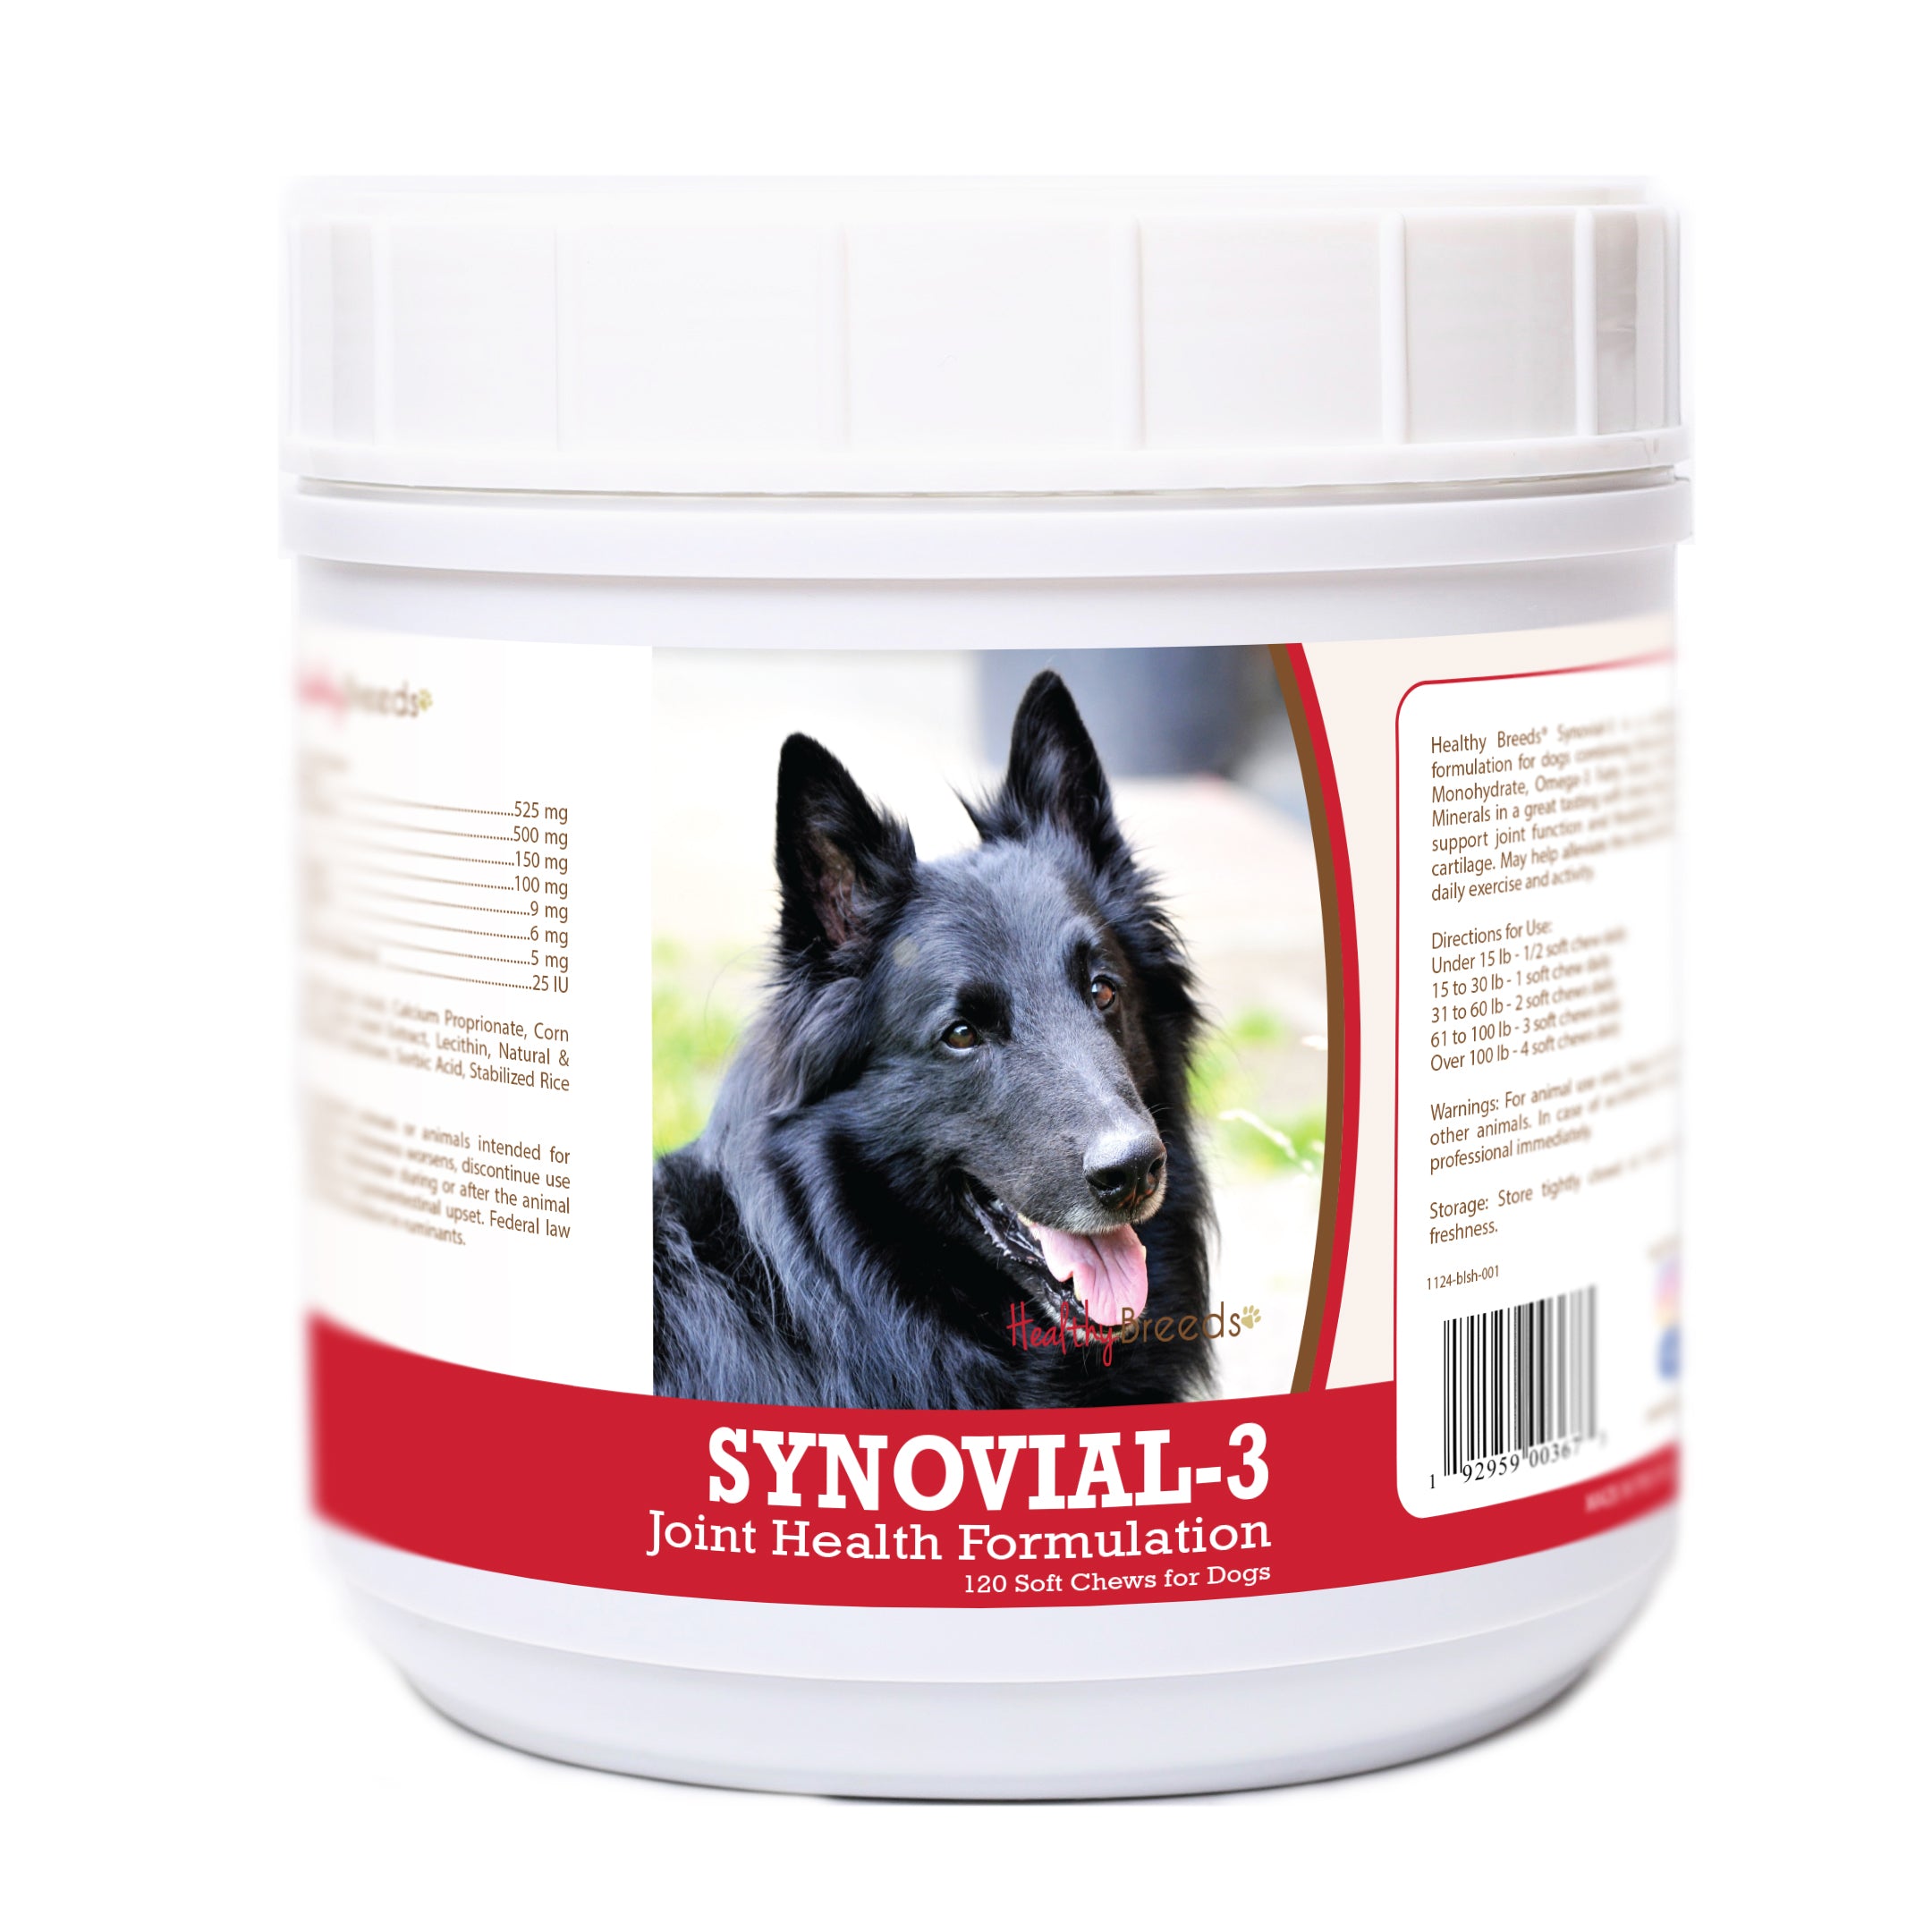 Belgian Sheepdog Synovial-3 Joint Health Formulation Soft Chews 120 Count